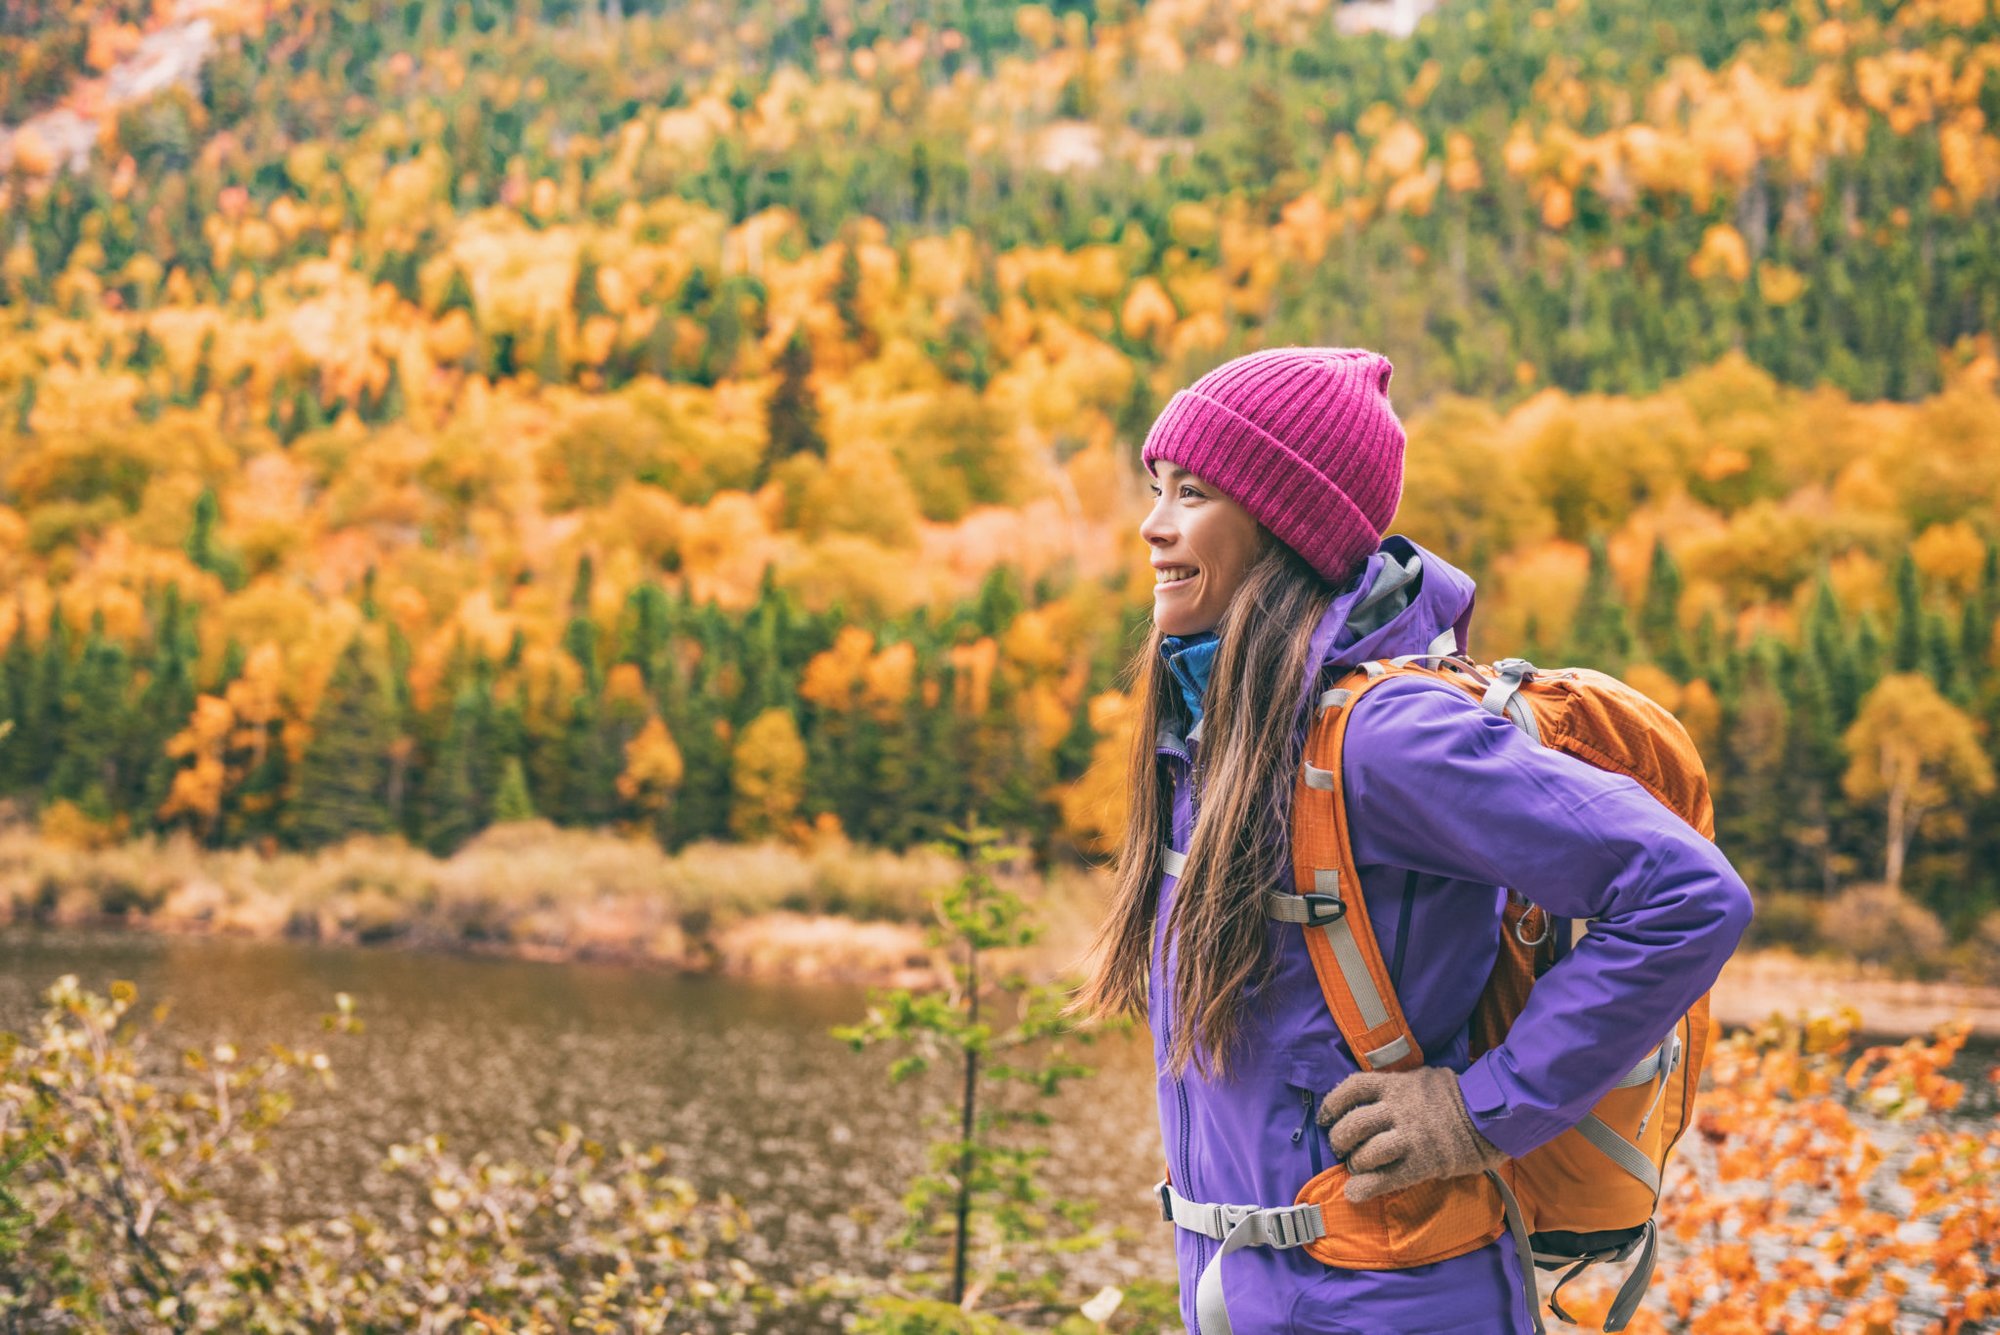 Fall autumn hiker girl outdoor at nature forest lake with backpack for camping travel trip. Happy Asian woman hiking outdoors with bag and hat, cold outerwear gear.